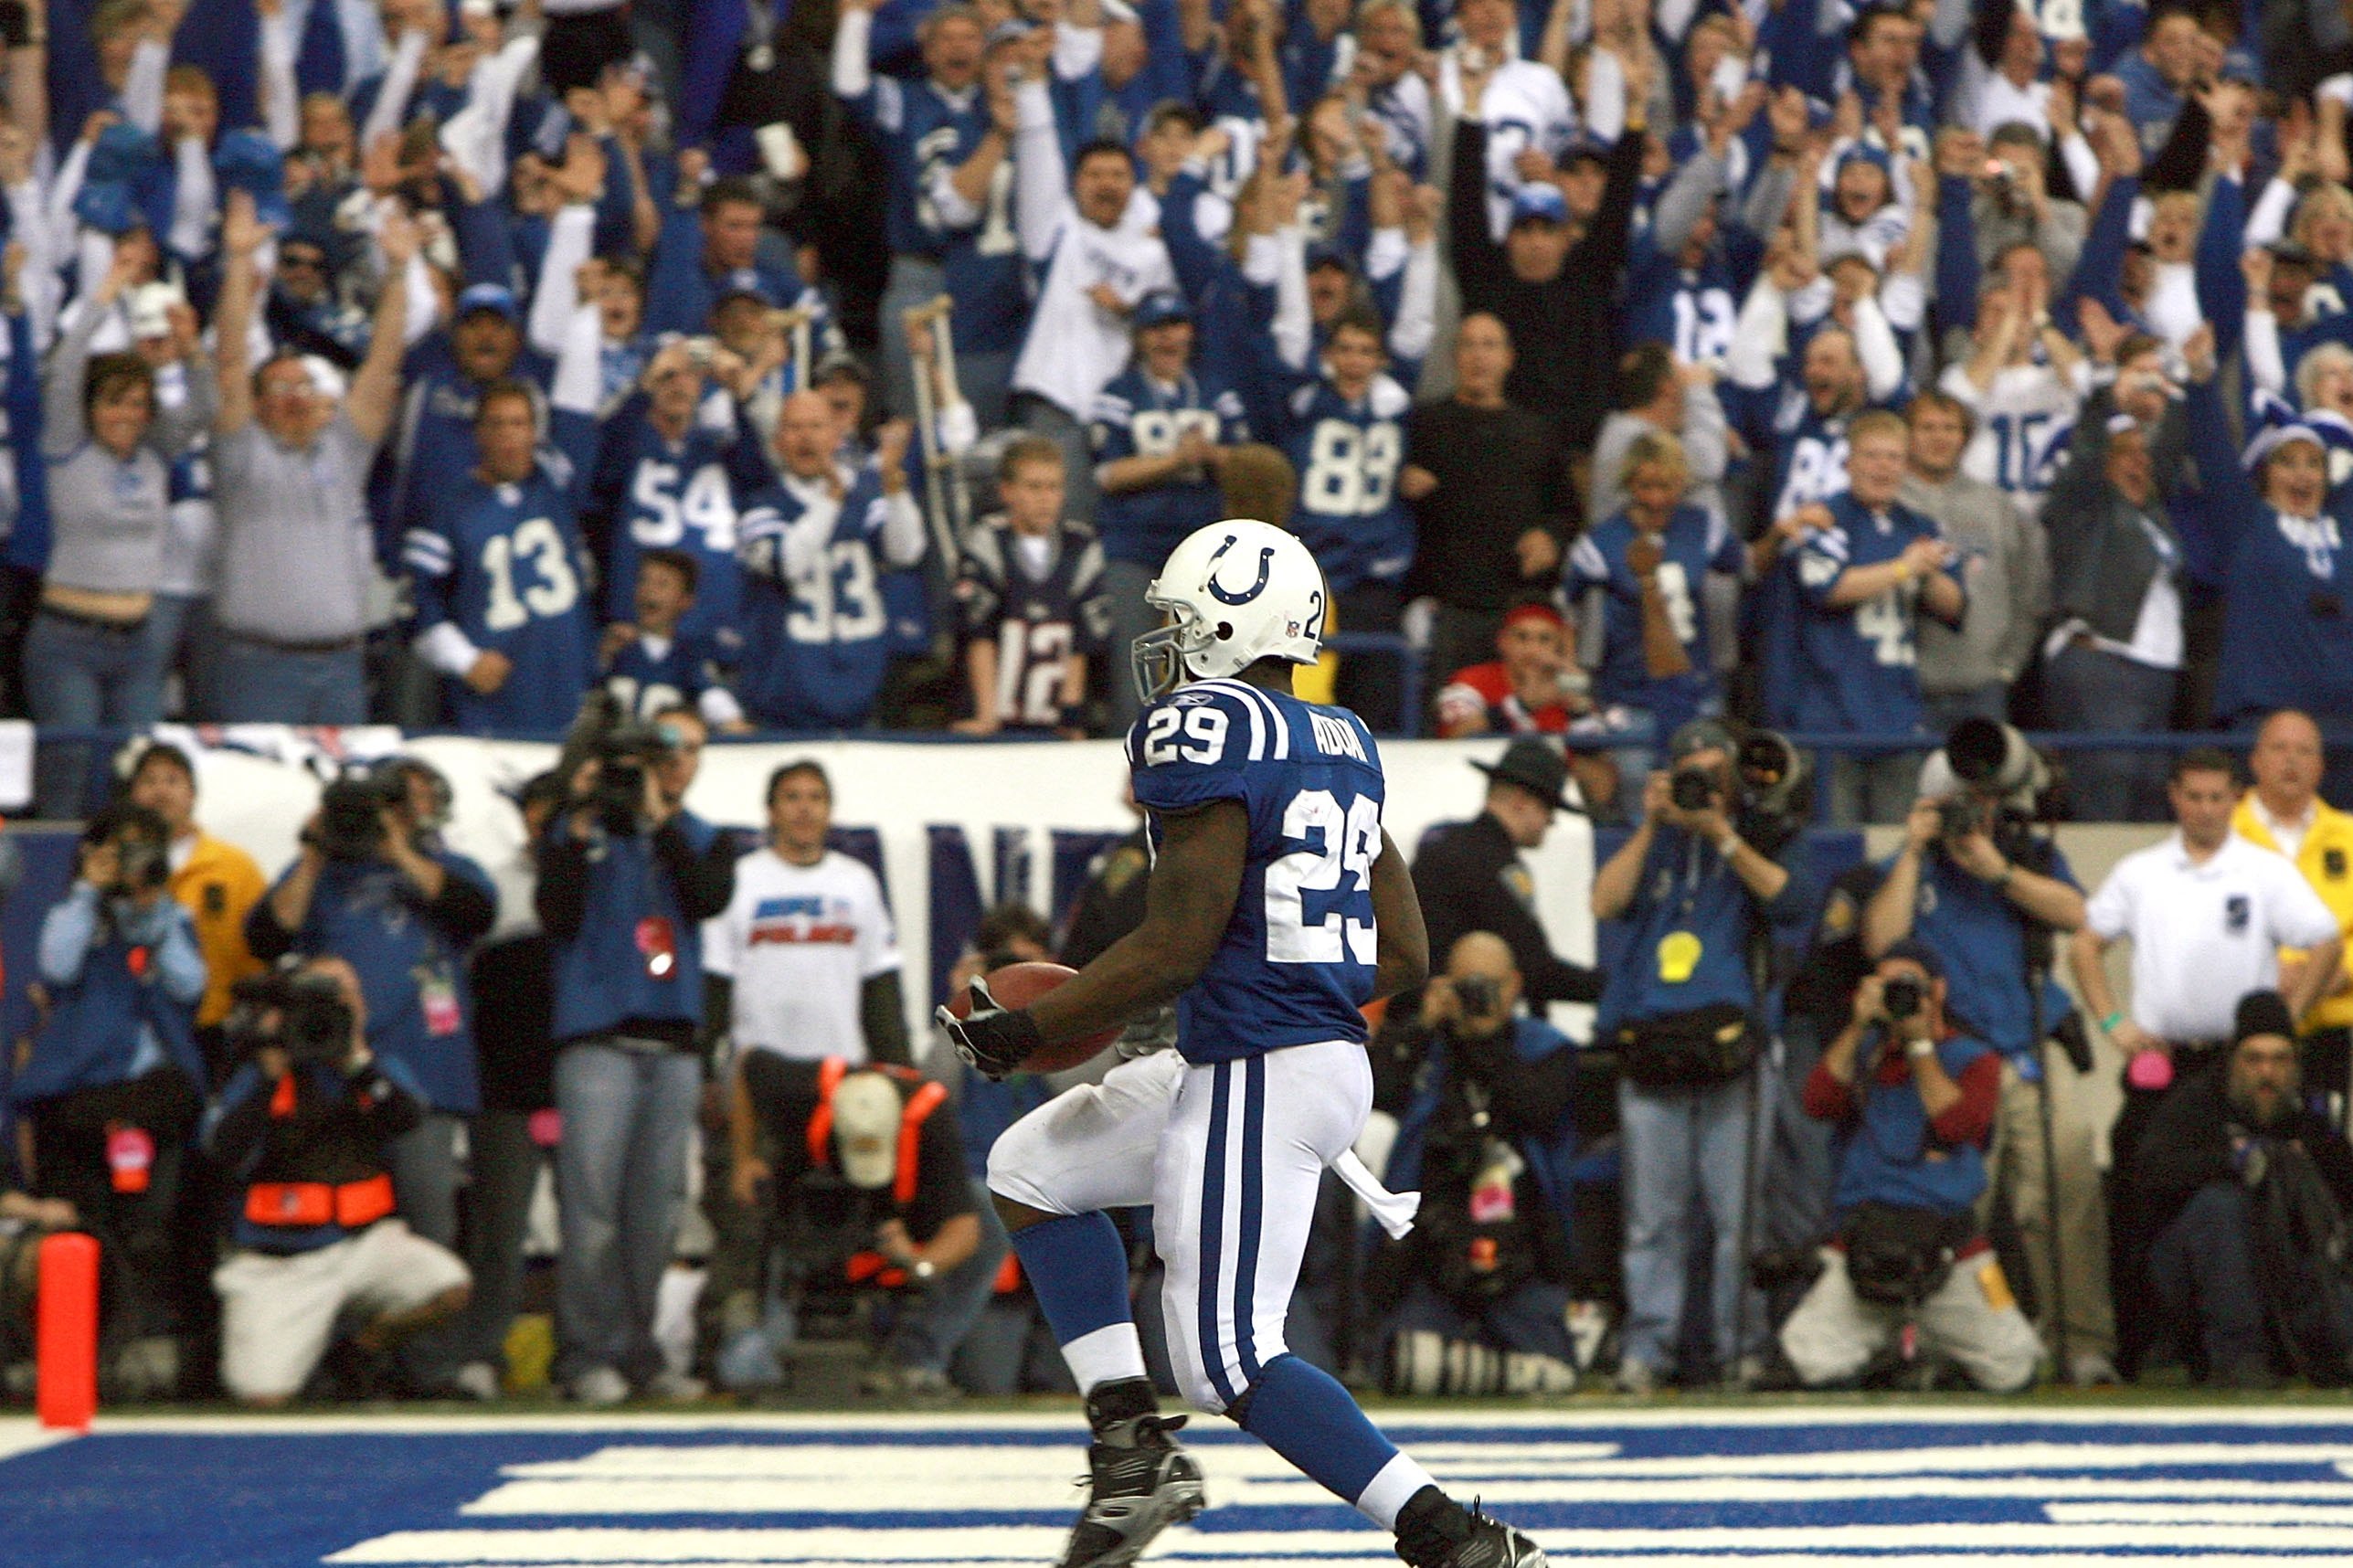 Looking back: Hurt of '07 AFC Championship immense for L.T.